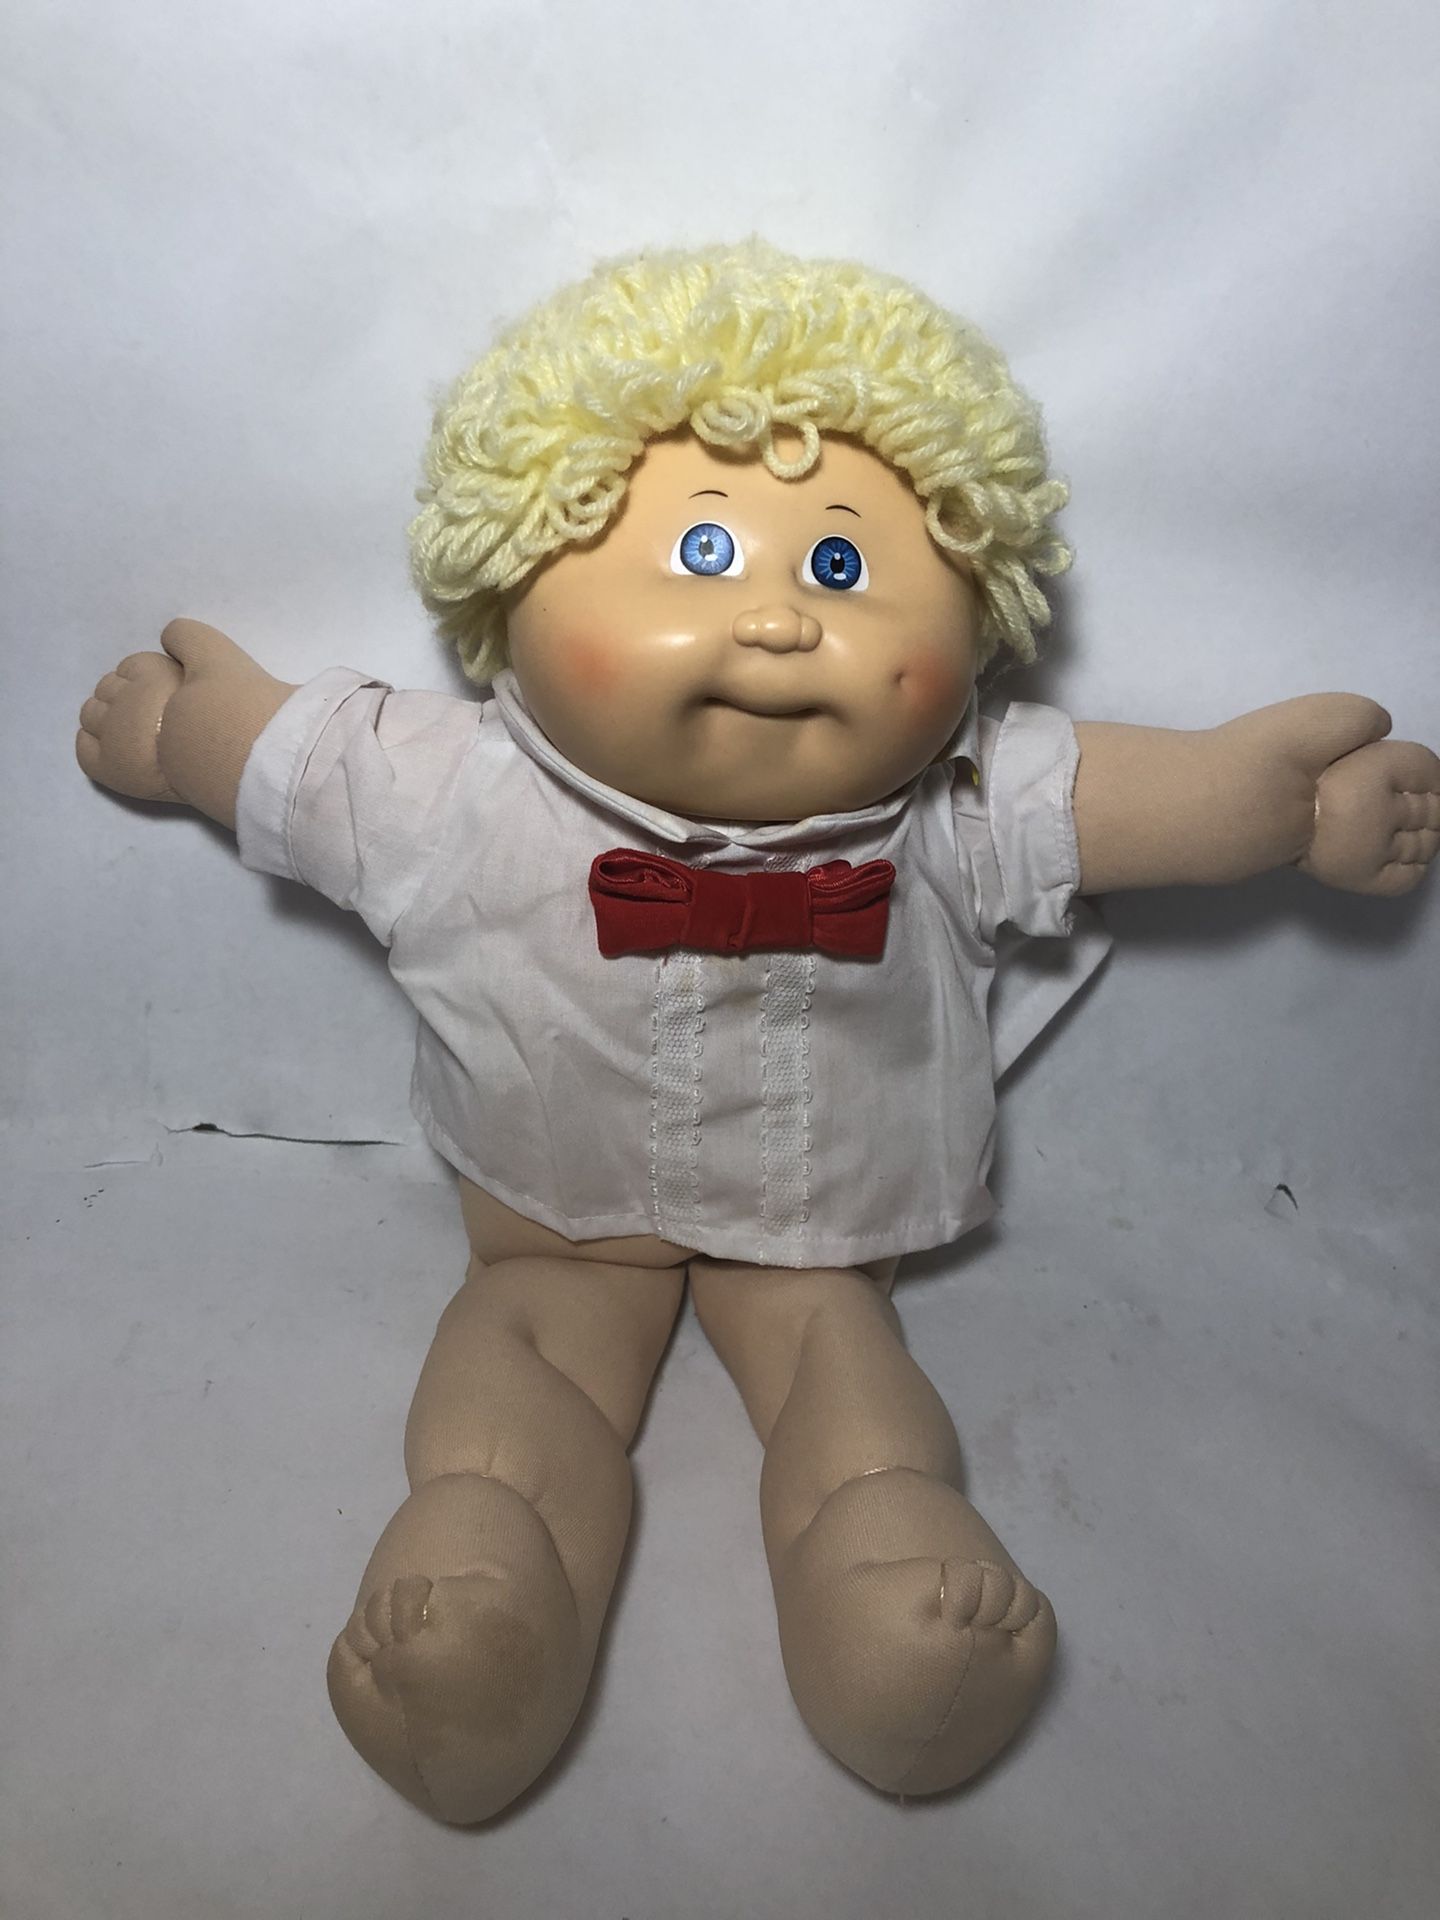 Vintage 1978 1982 CABBAGE PATCH DOLL Blonde Hair Blue Eyes Fast Shipping!